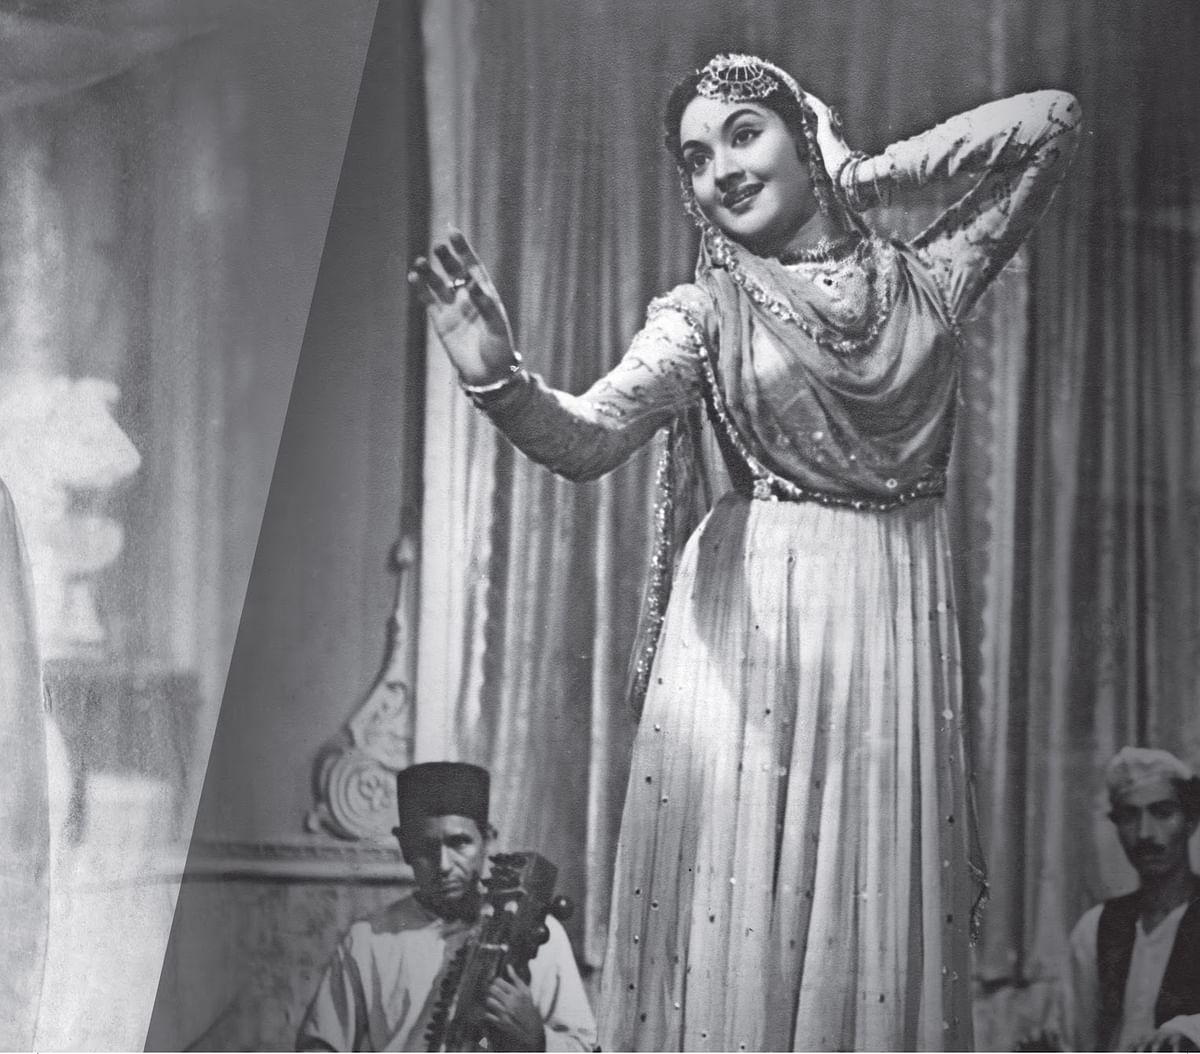 On Vyjayanthimala’s birthday, here’s a special tribute to the veteran actor.